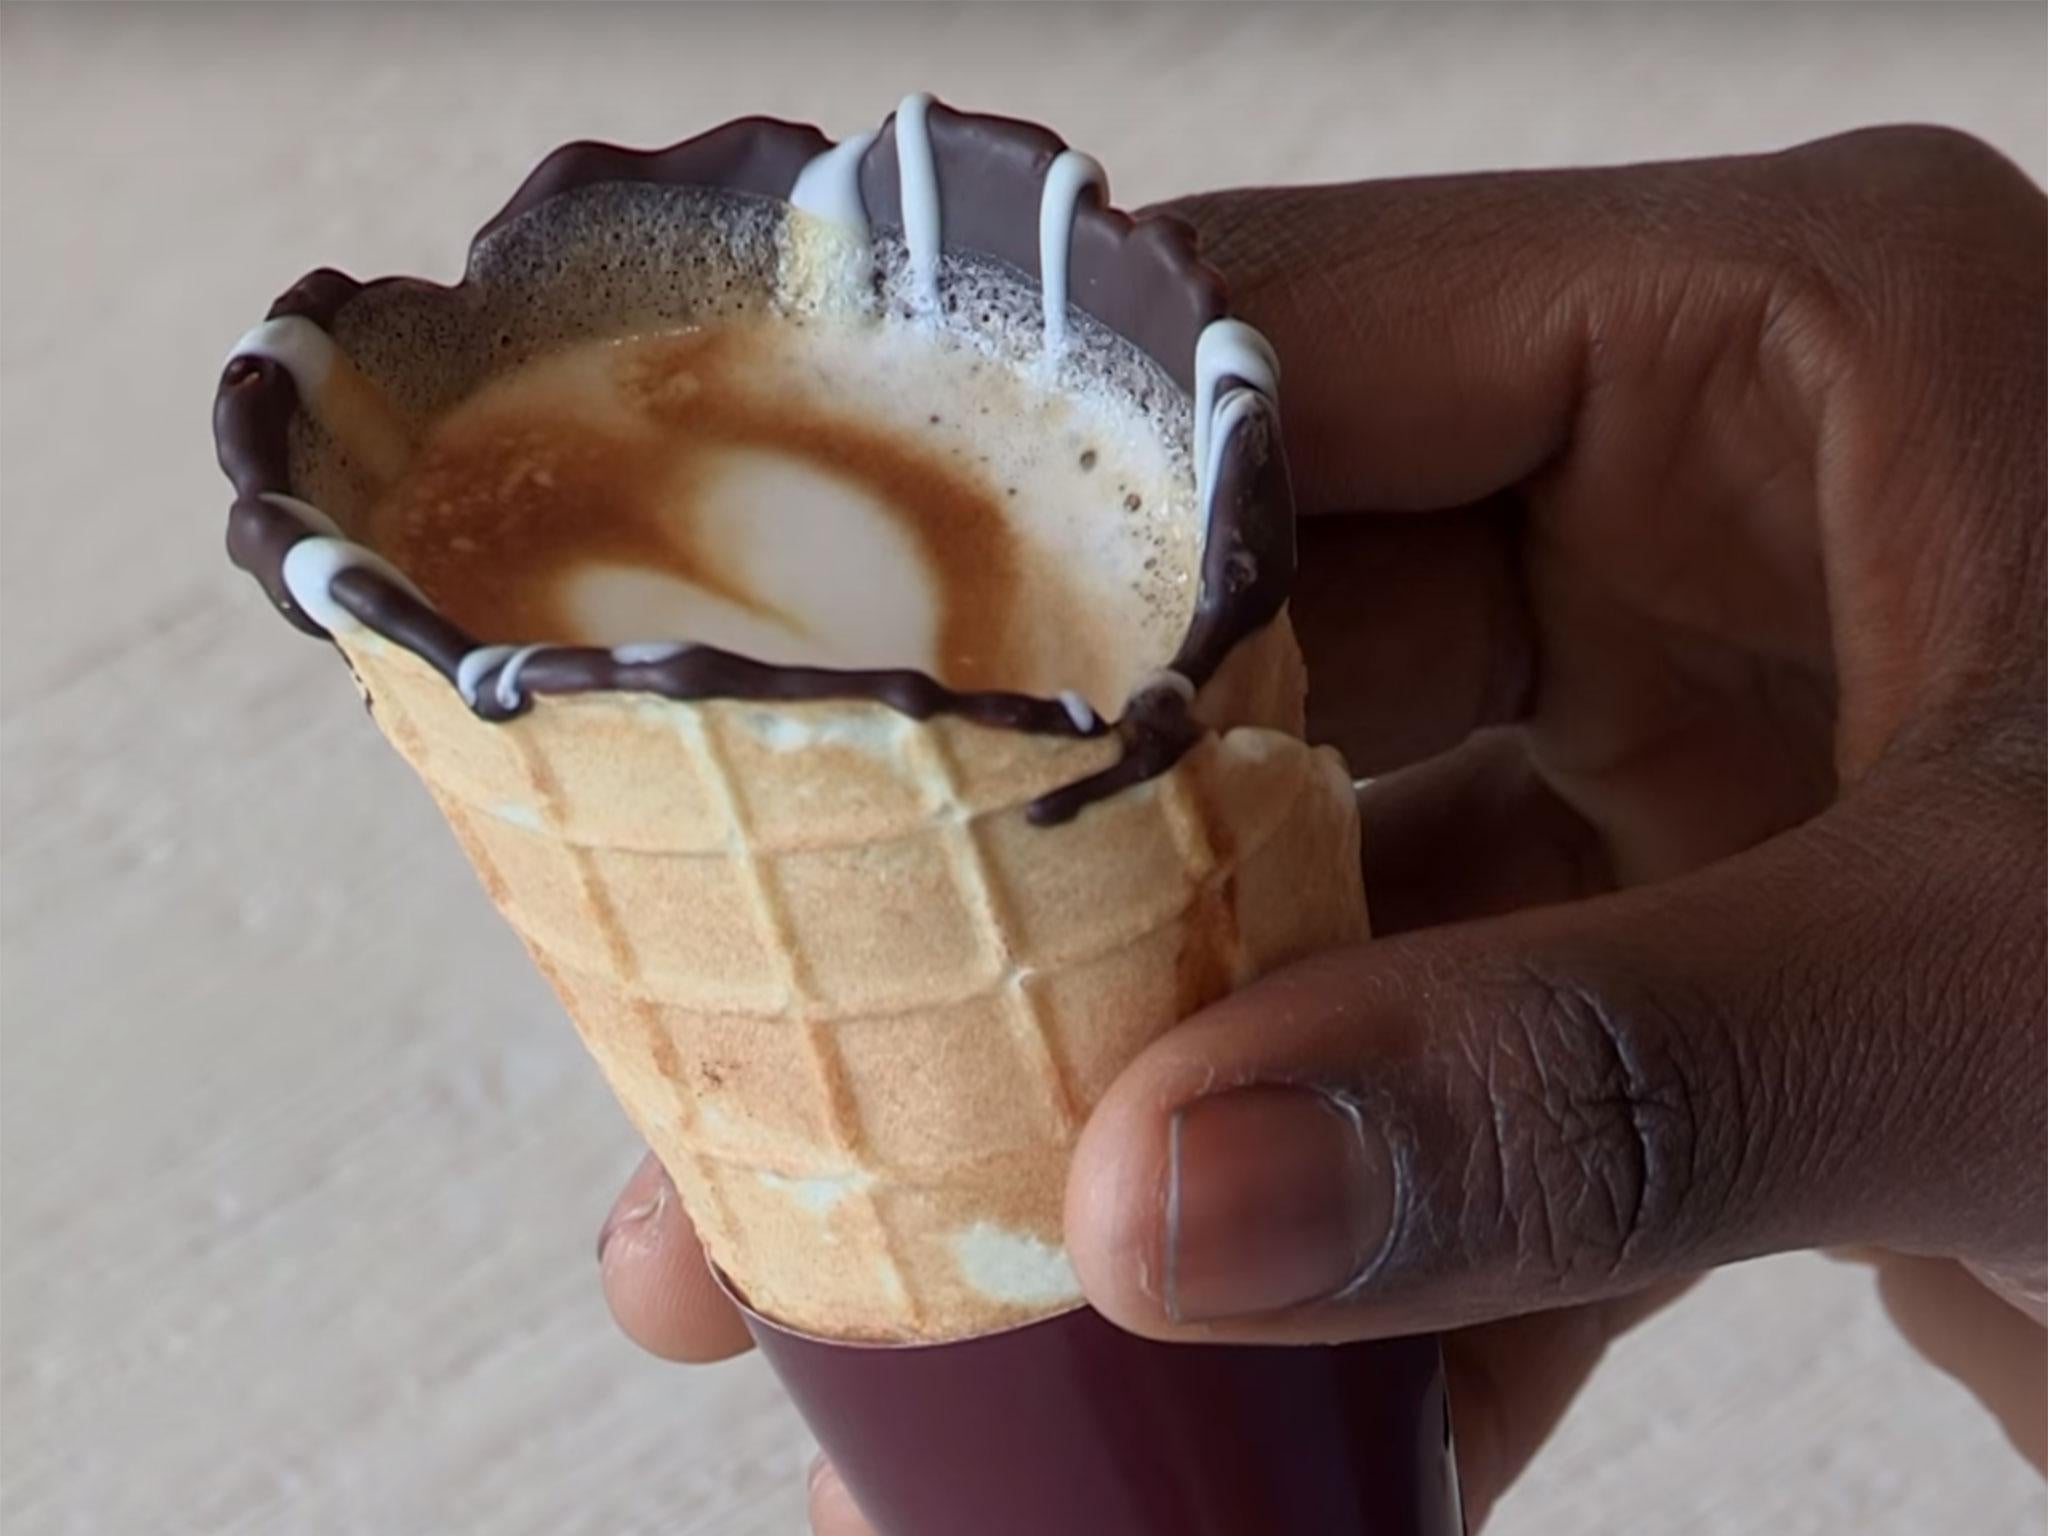 The time-bomb coffee in a cone